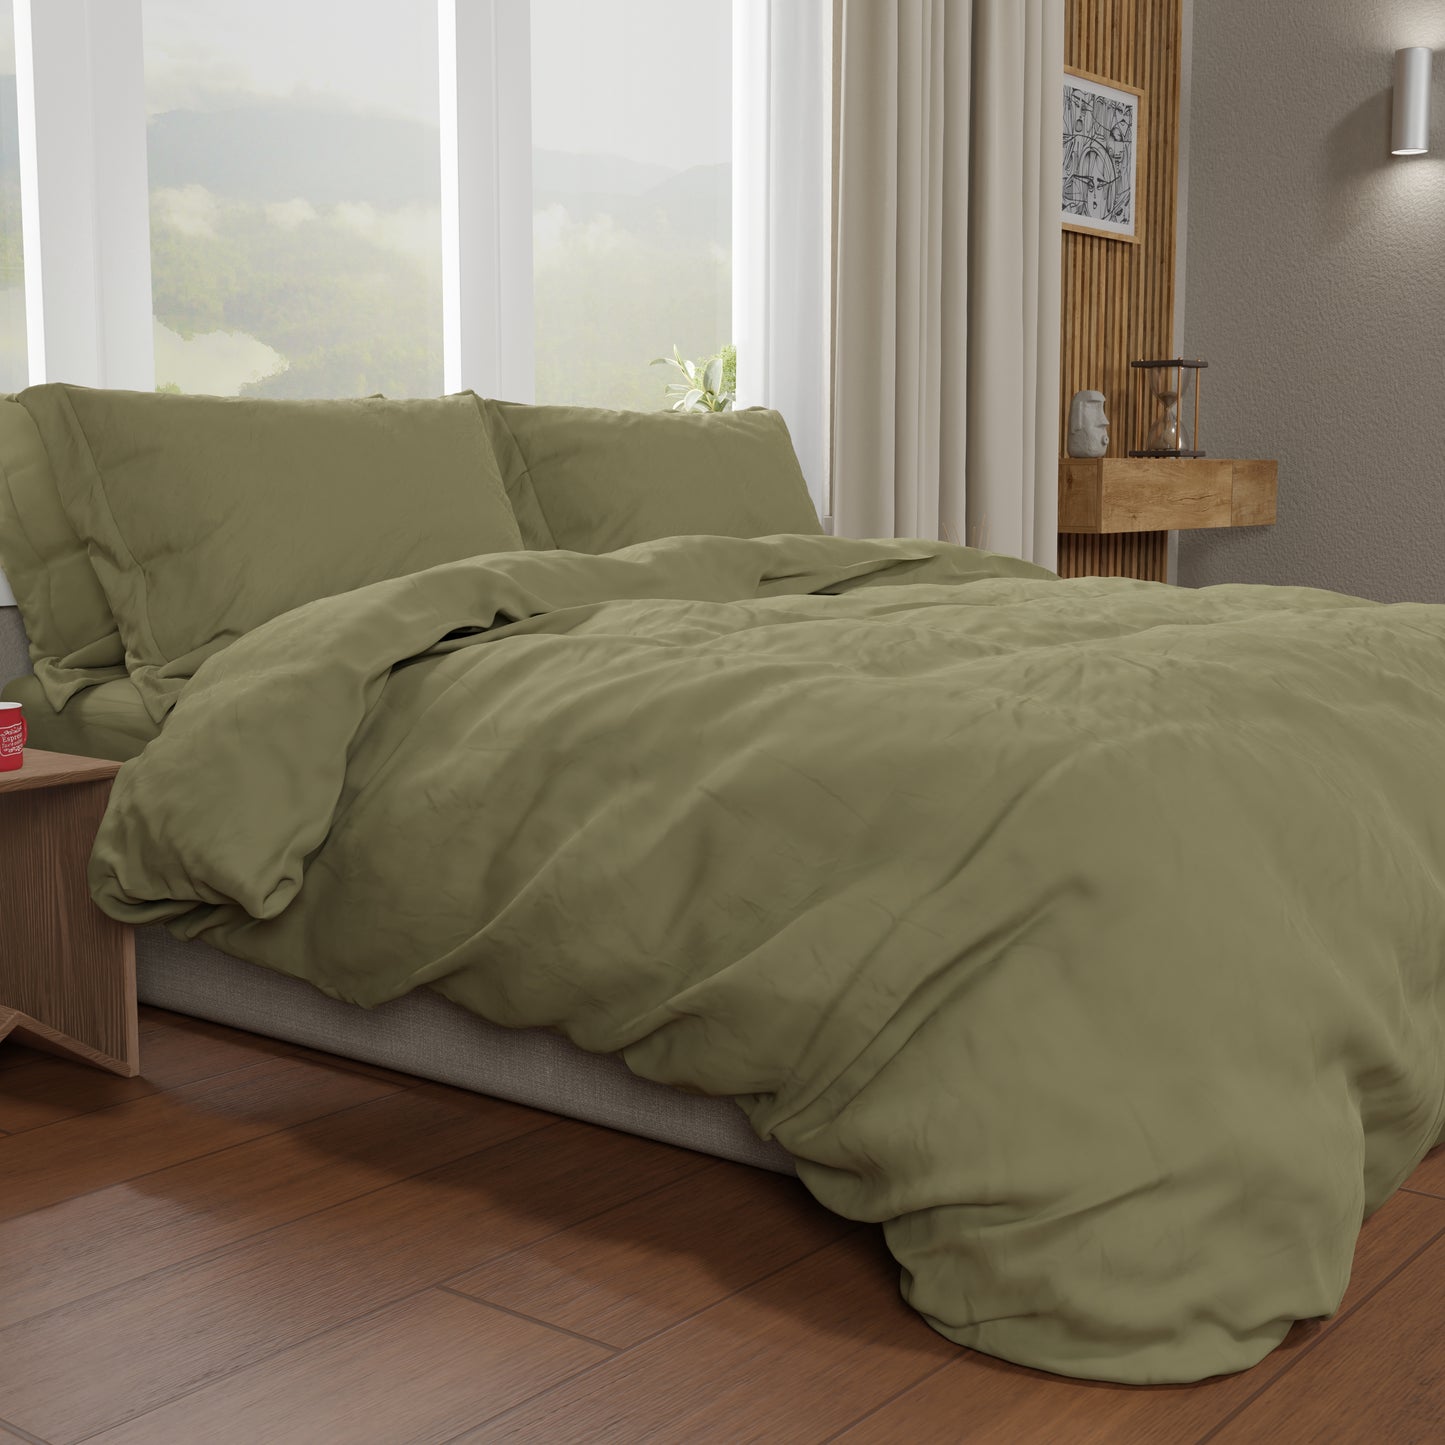 Double duvet cover, duvet cover and pillowcases, solid color mud